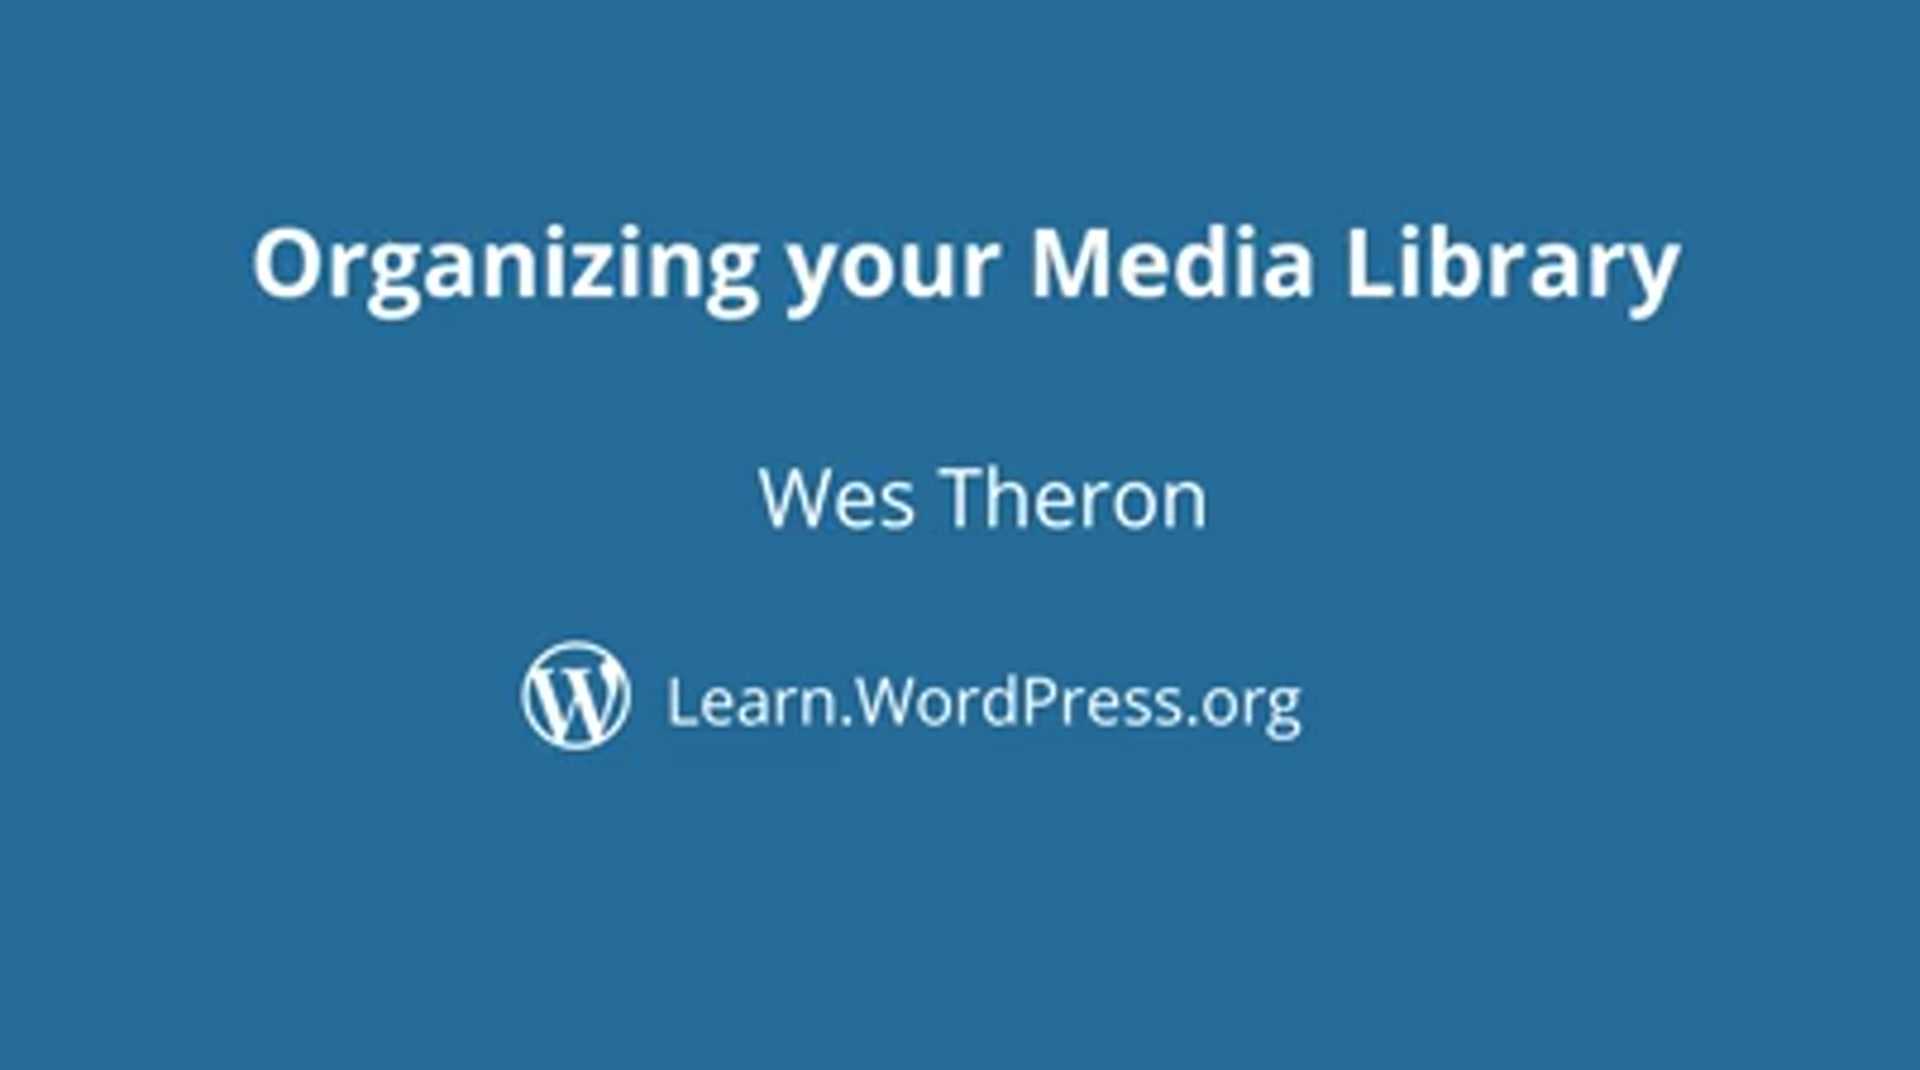 Organizing your Media Library